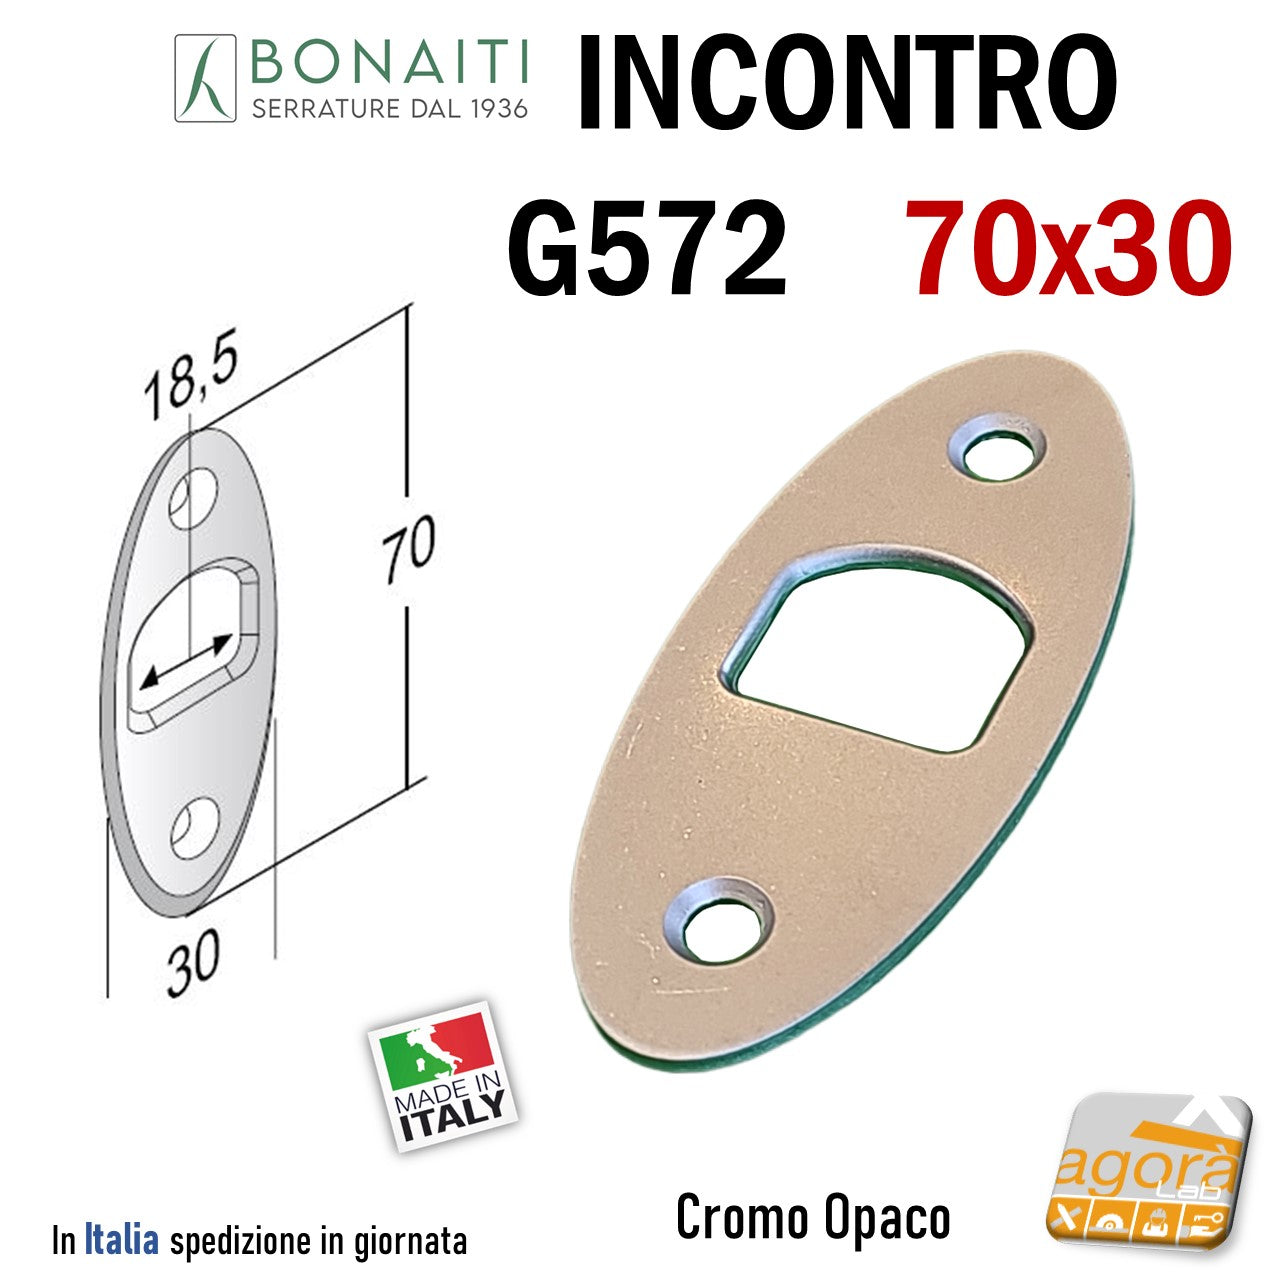 New products – Tagged Finitura Cromo Opaco–